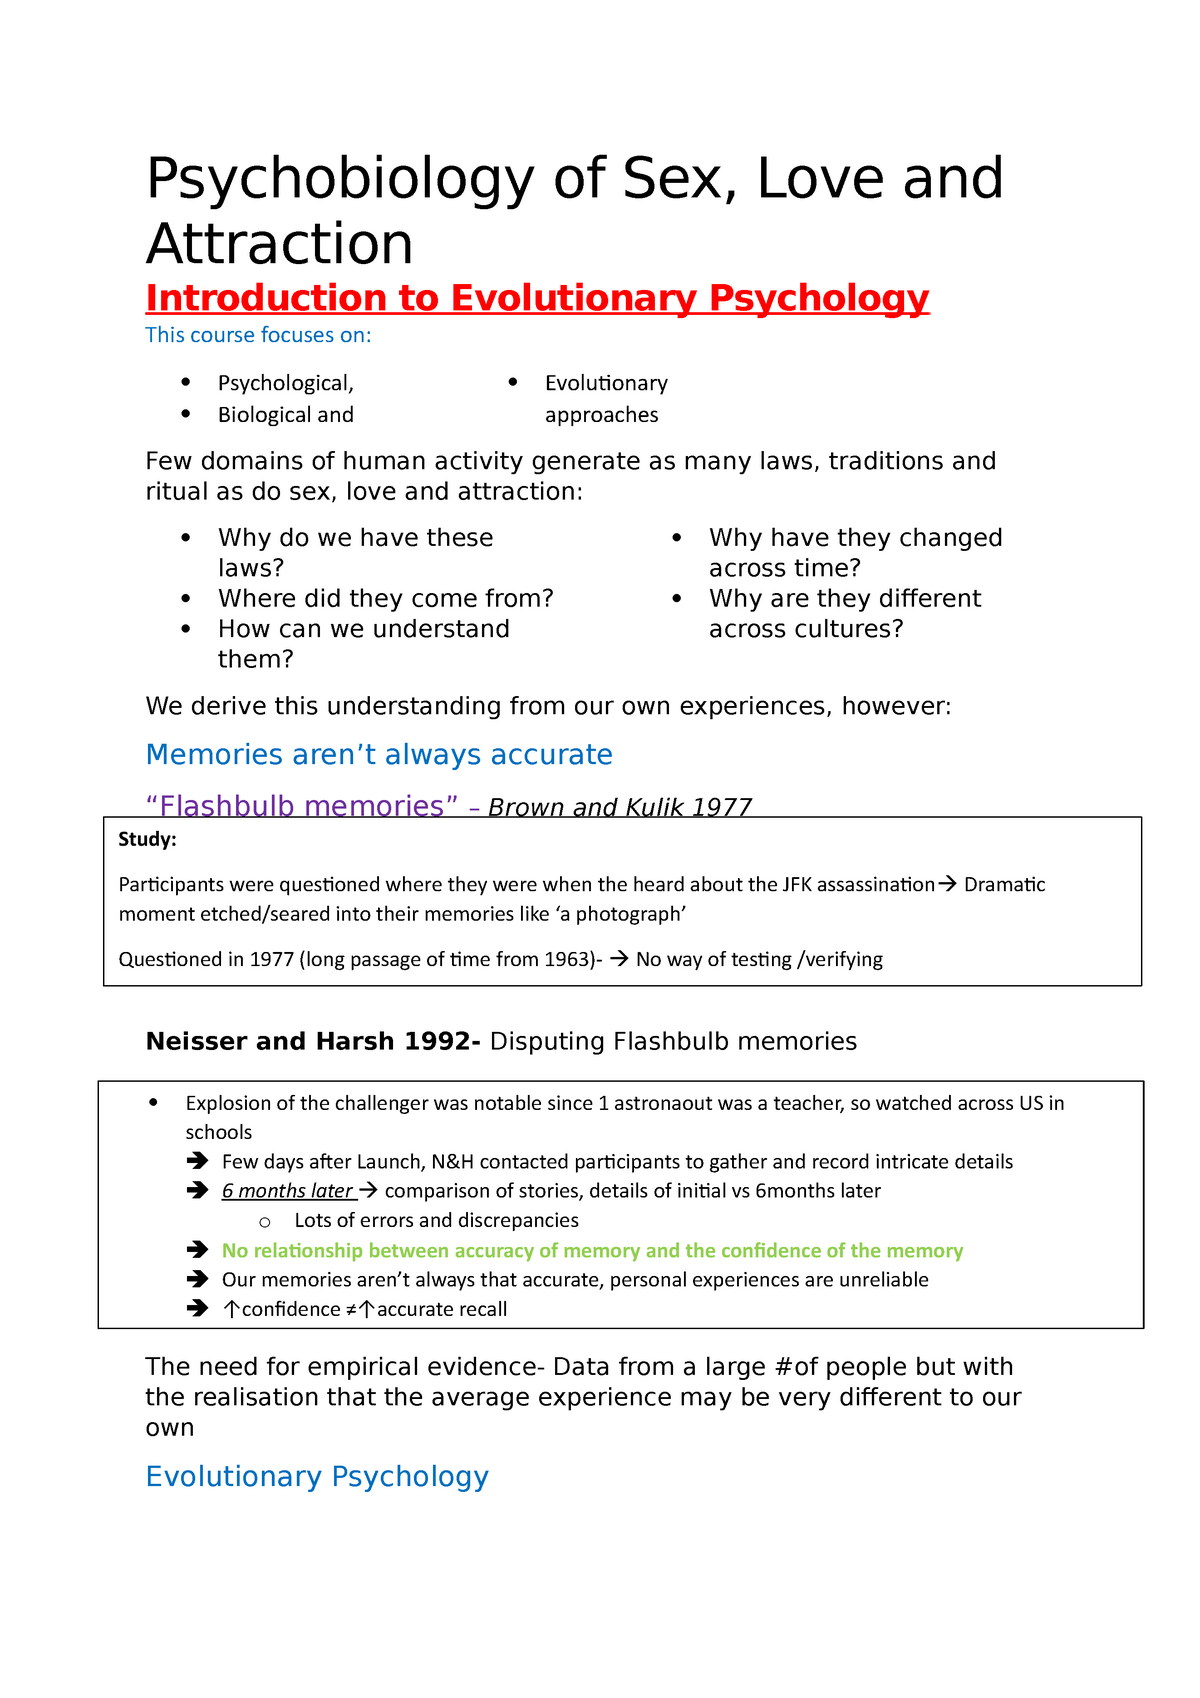 Psychobiology 1029 Notes Psychobiology Of Sex Love And Attraction Introduction To